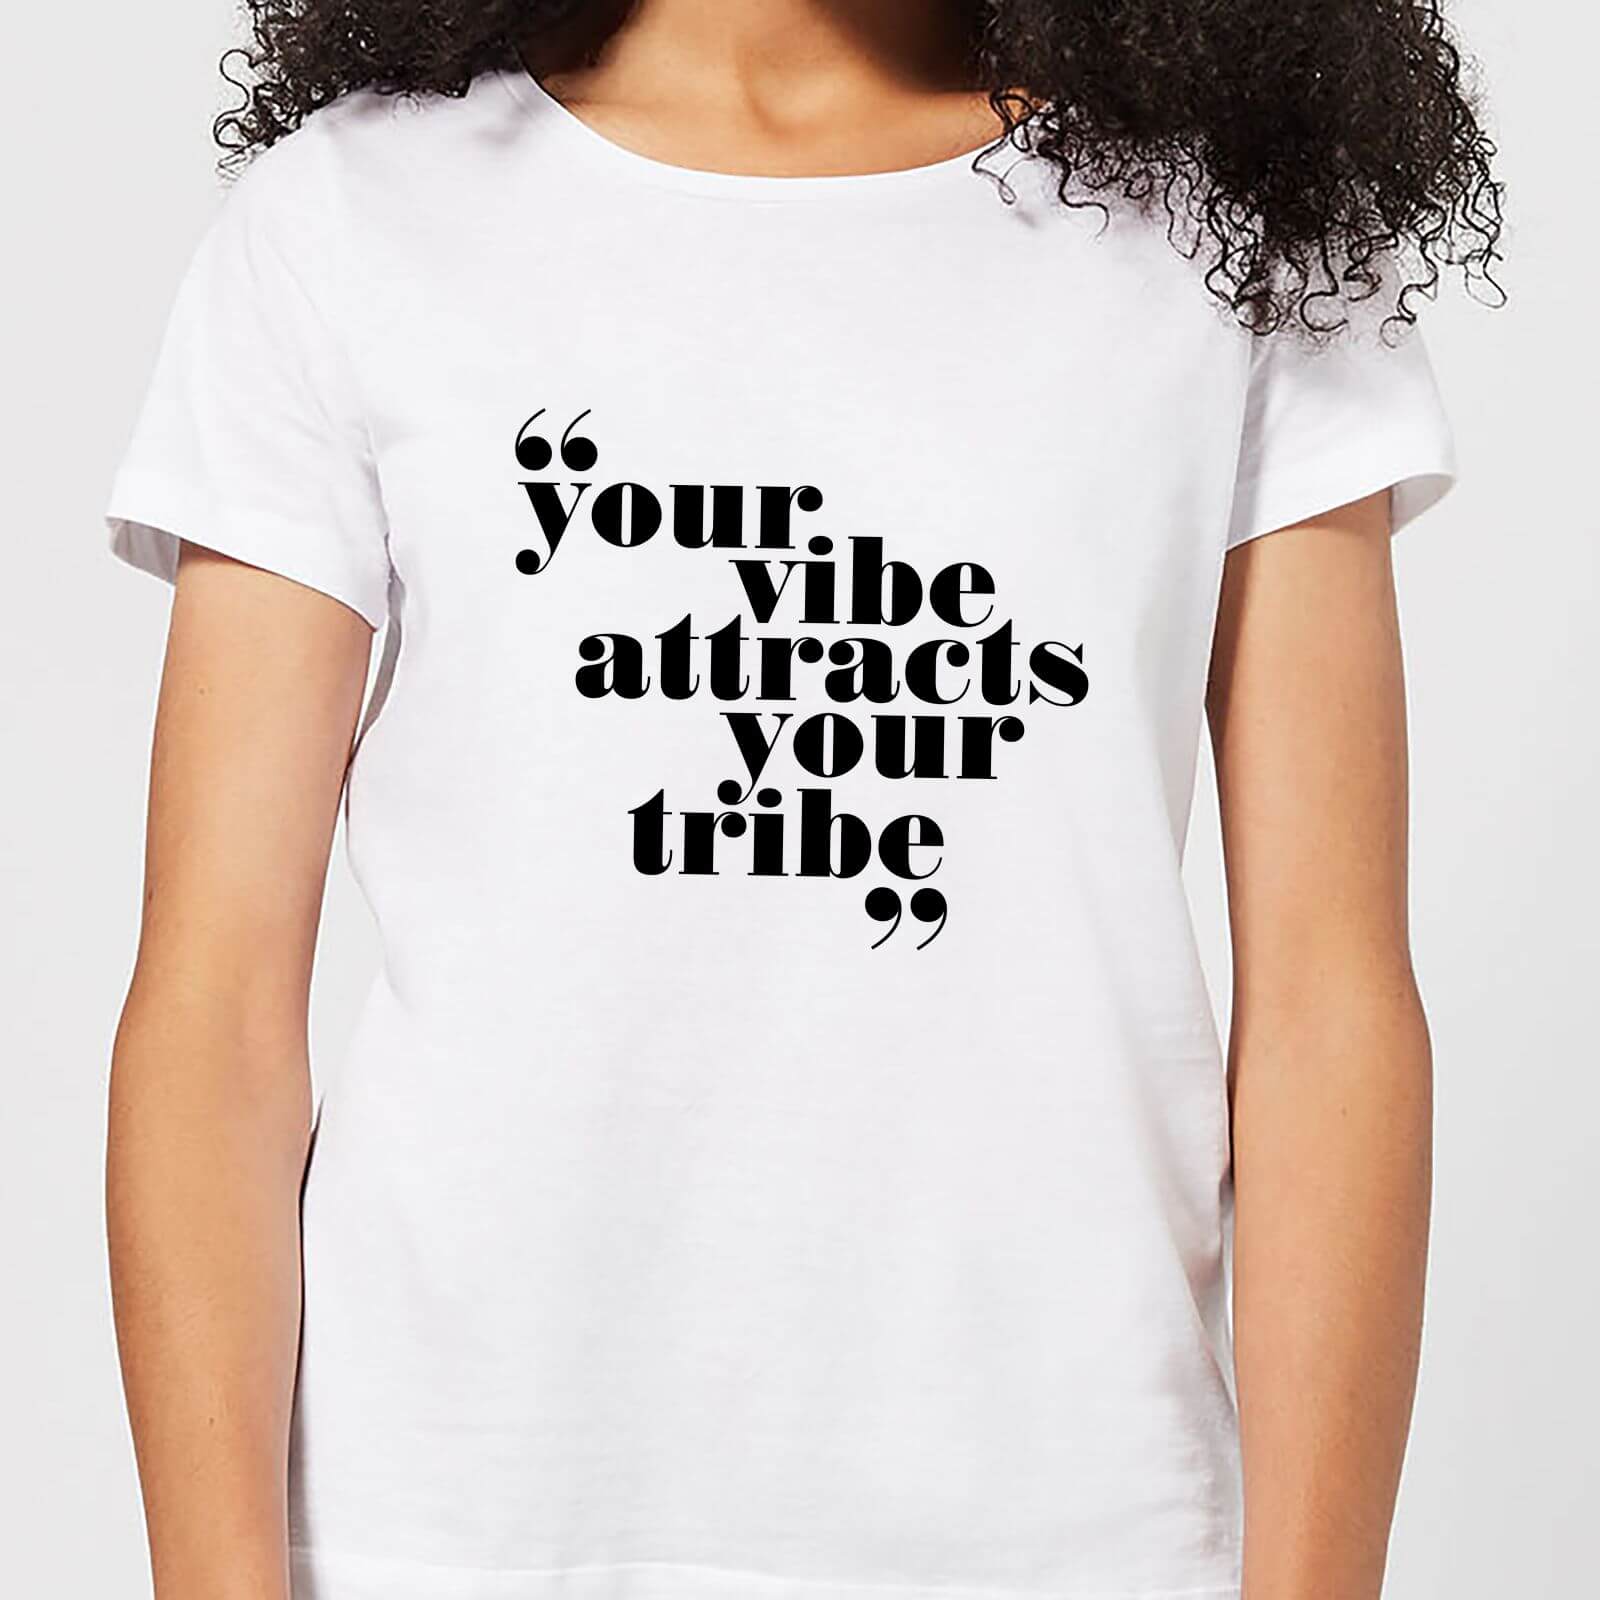 Your Vibe Attracts Your Tribe Women's T-Shirt - White - M - White